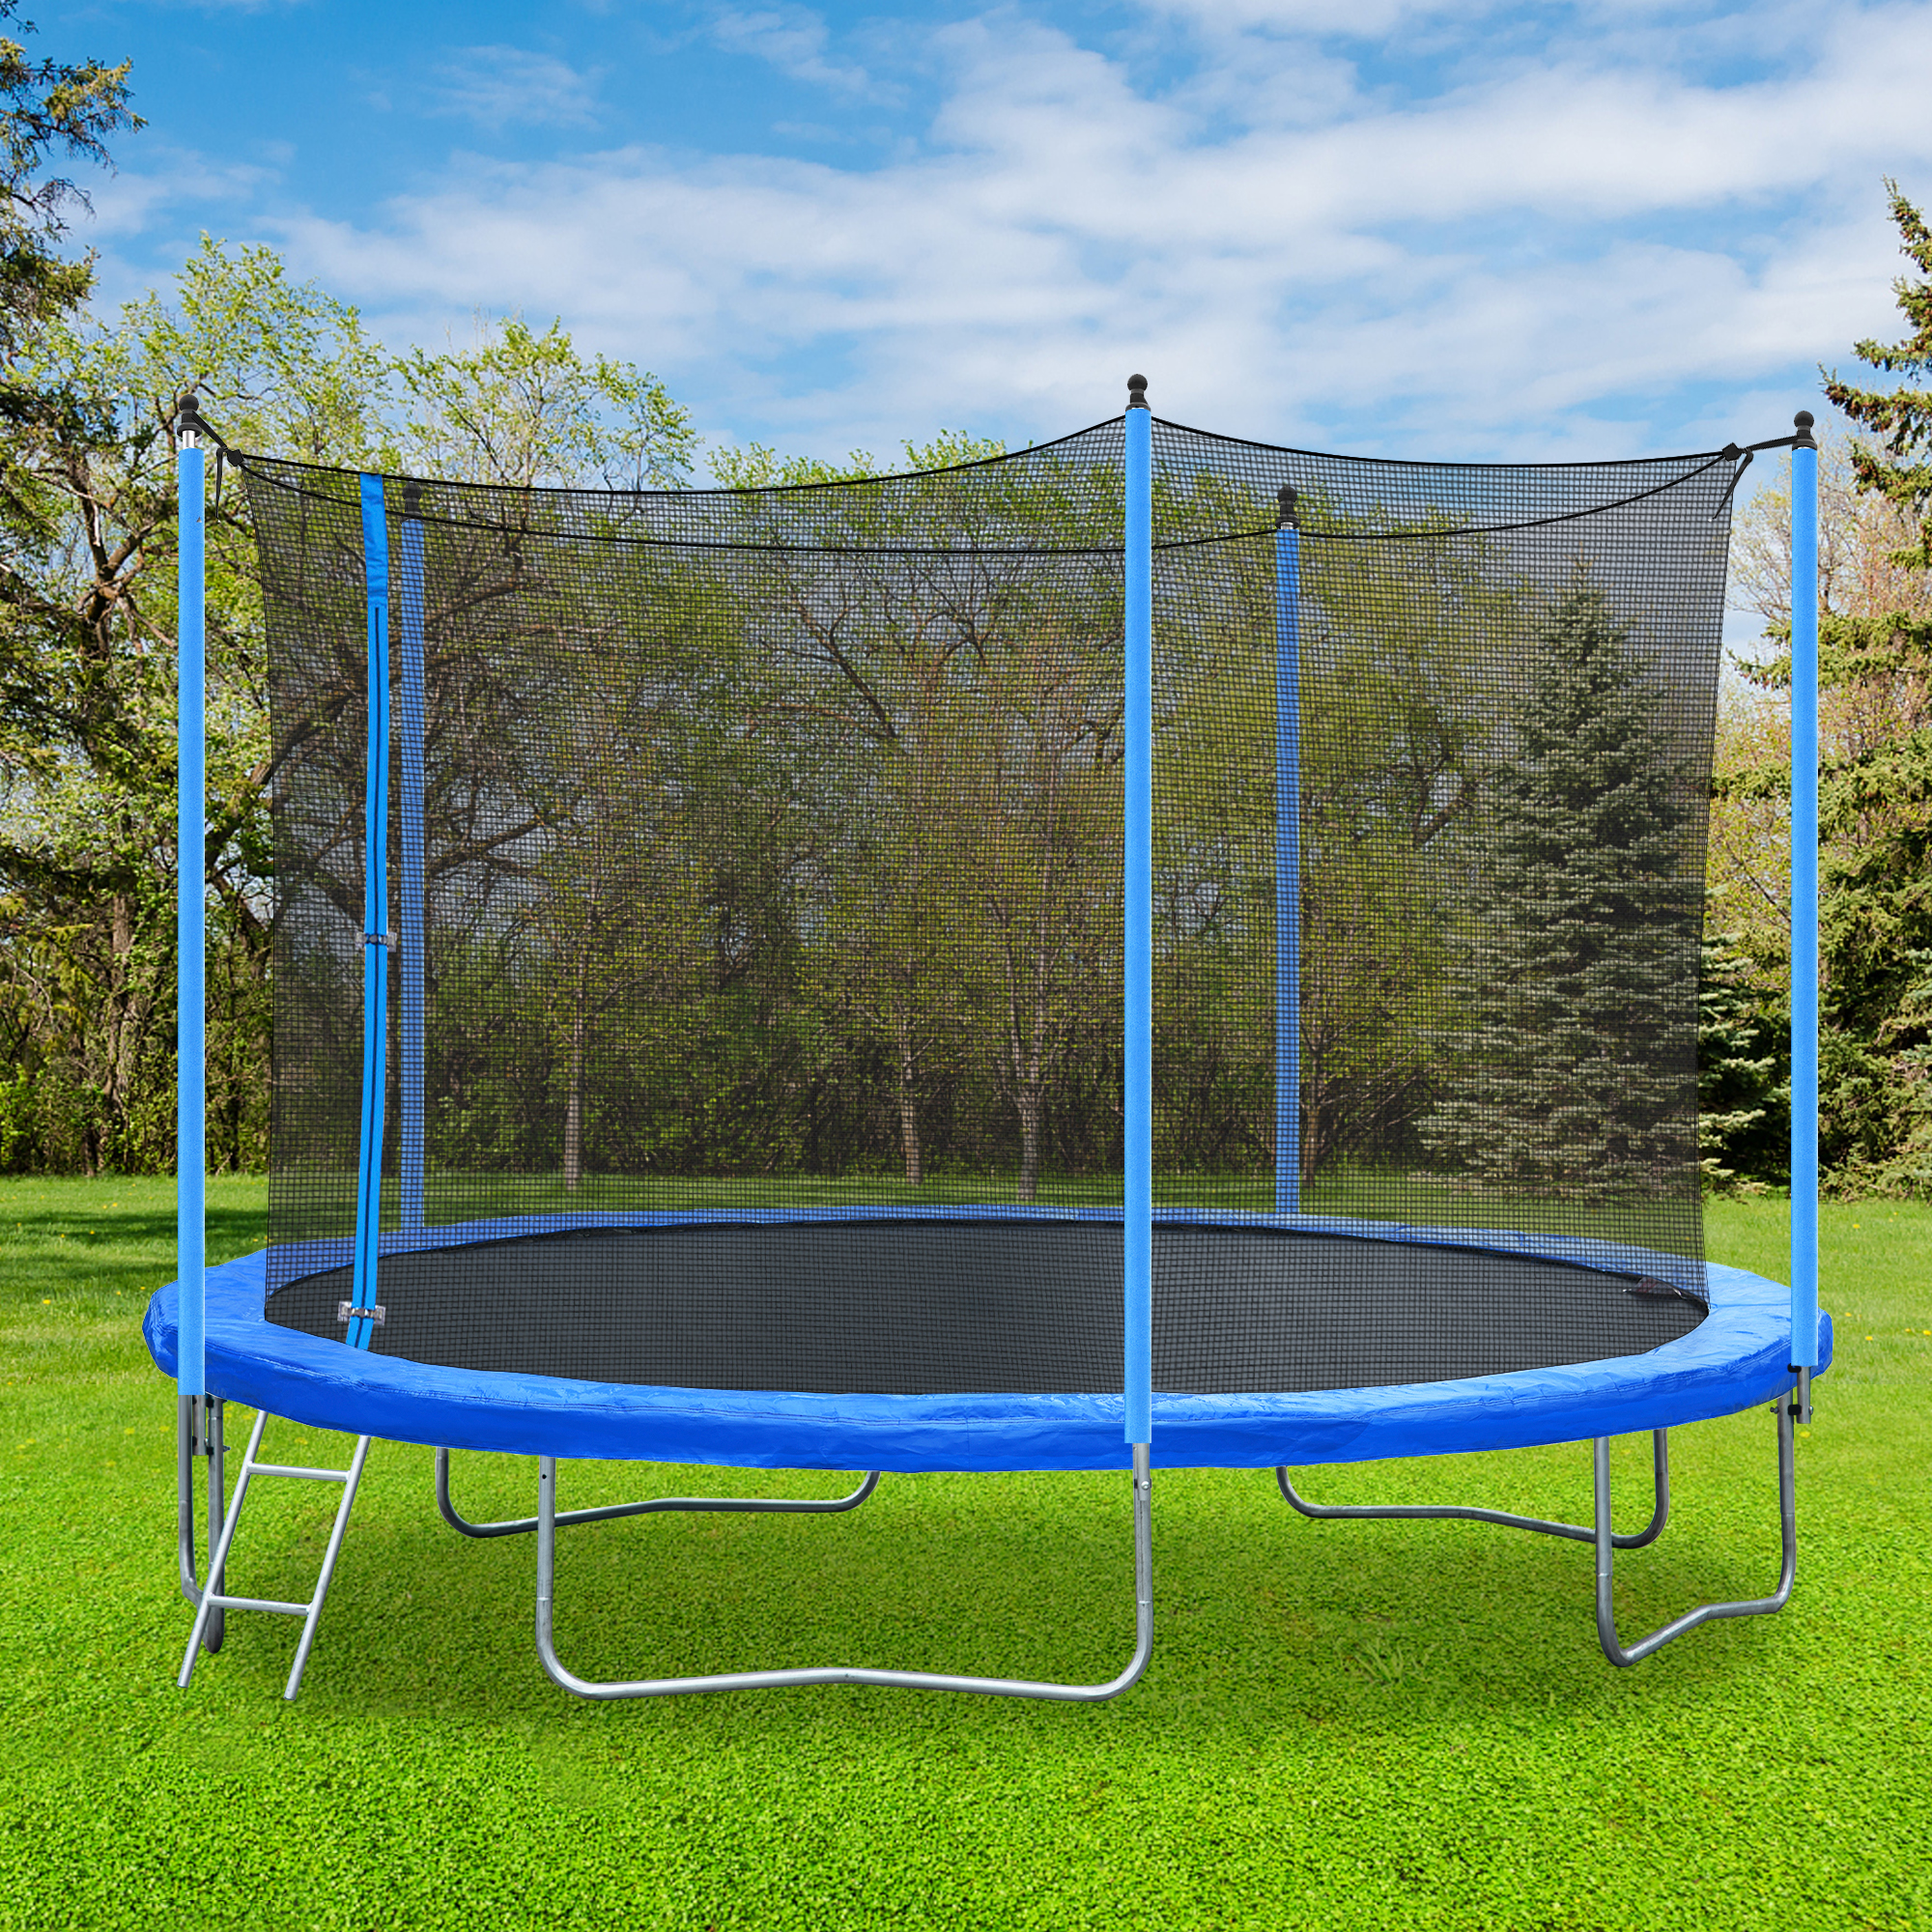 Euroco 12FT Trampoline for Kids, Solid Trampoline with Enclosure and Ladder for Adults and 4-5 Kids, Outdoor Recreation Trampoline, High Duty Safety - image 5 of 10